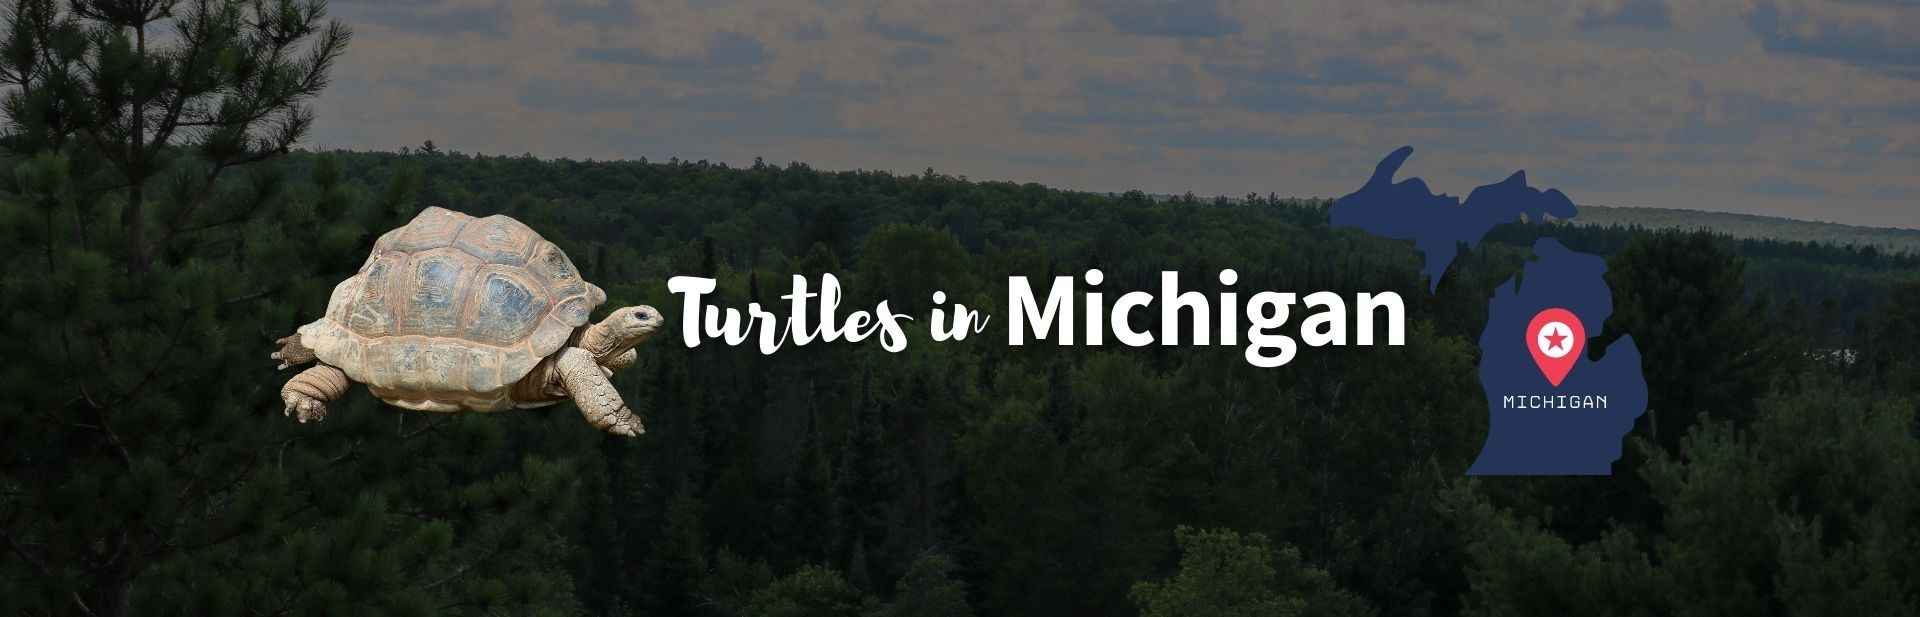 10 Amazing Types of Turtles in Michigan (ID Guide and Photos)